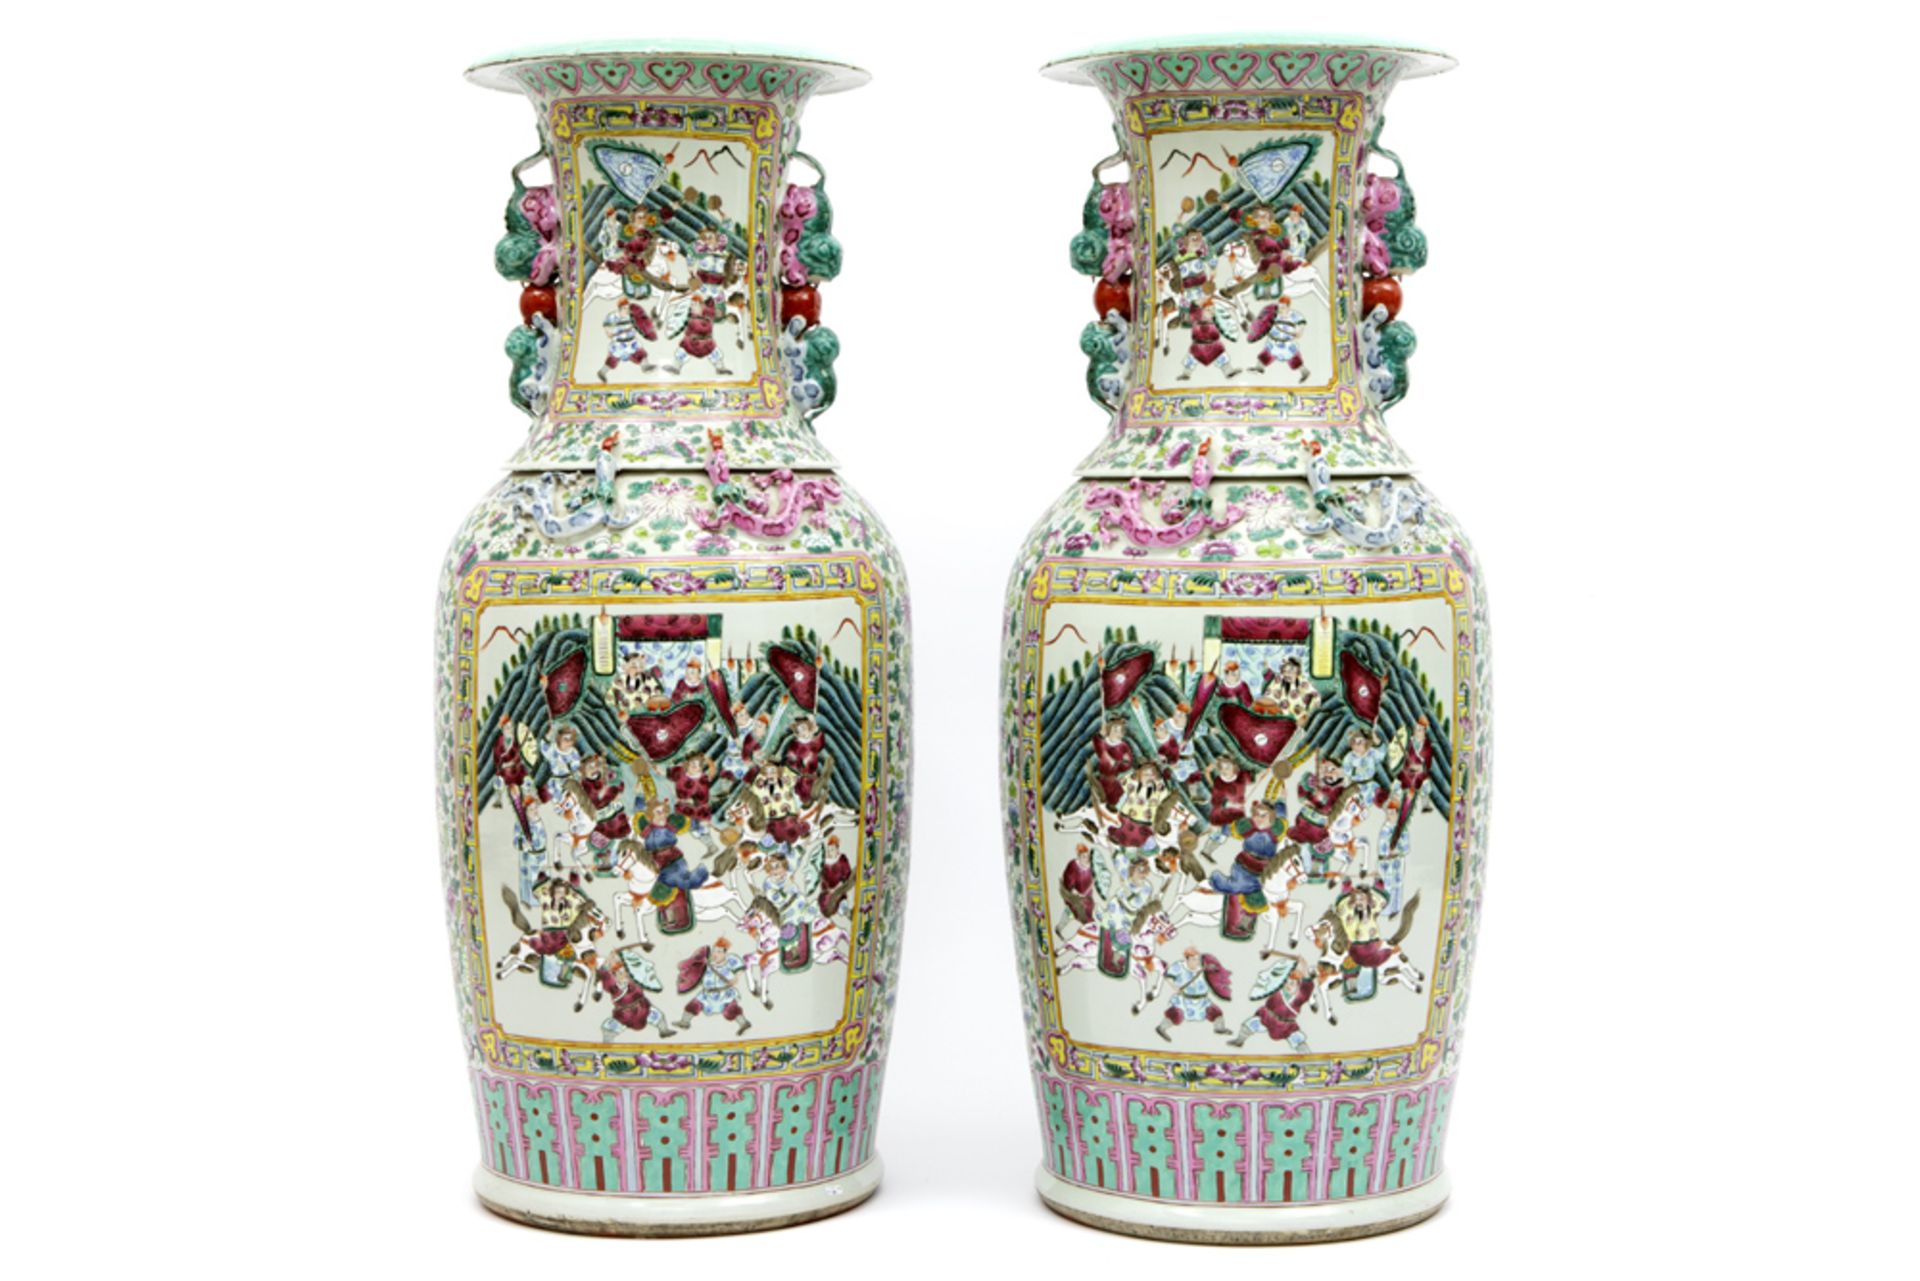 impressive pair of 19th Cent. Chinese vases (100 cm high) in porcelain with rich polychrome